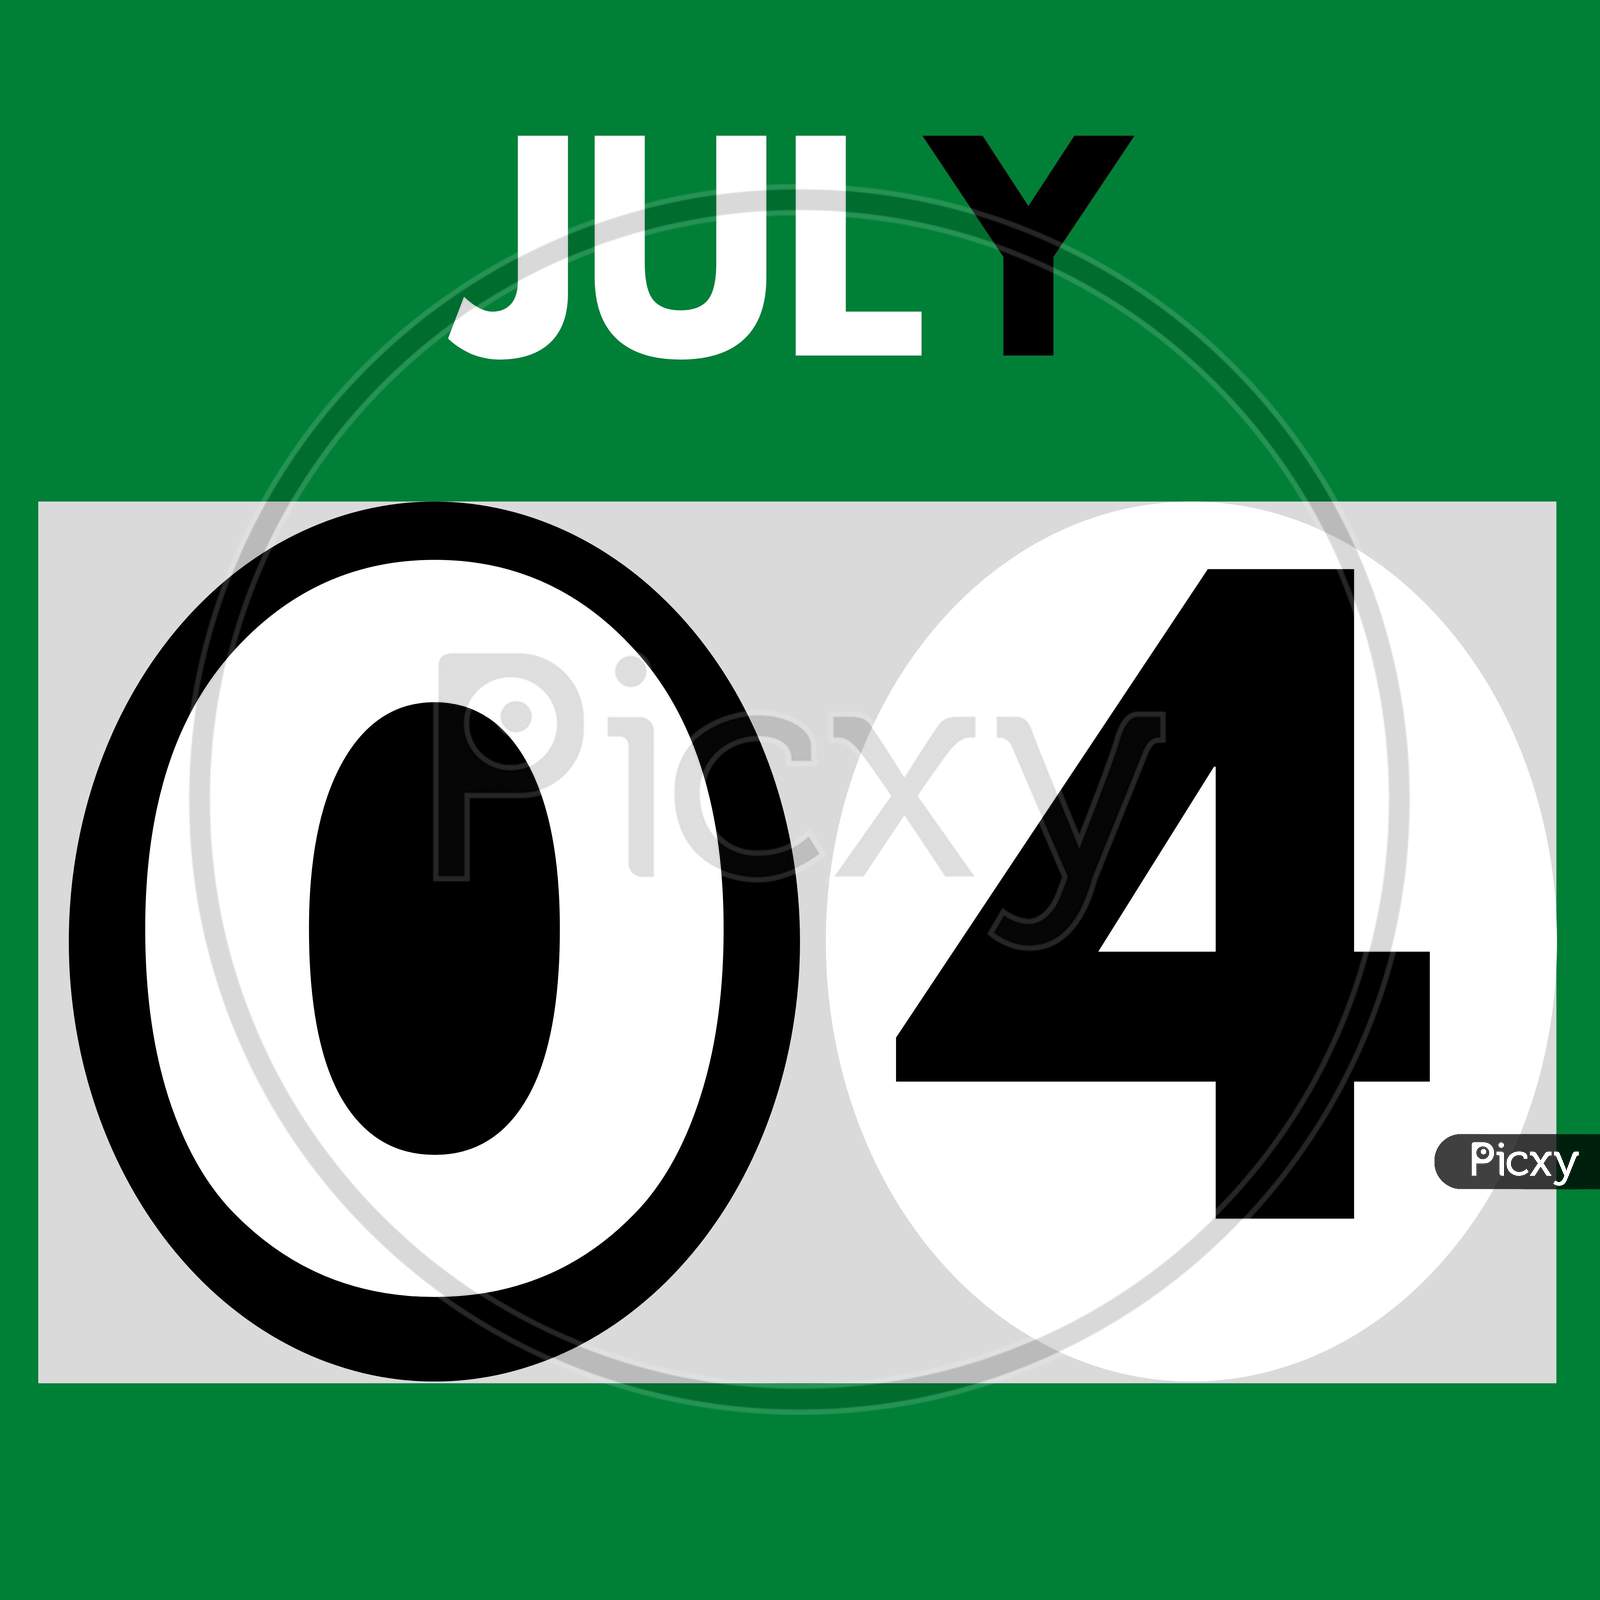 July 4 . Modern Daily Calendar Icon .Date ,Day, Month .Calendar For The Month Of July